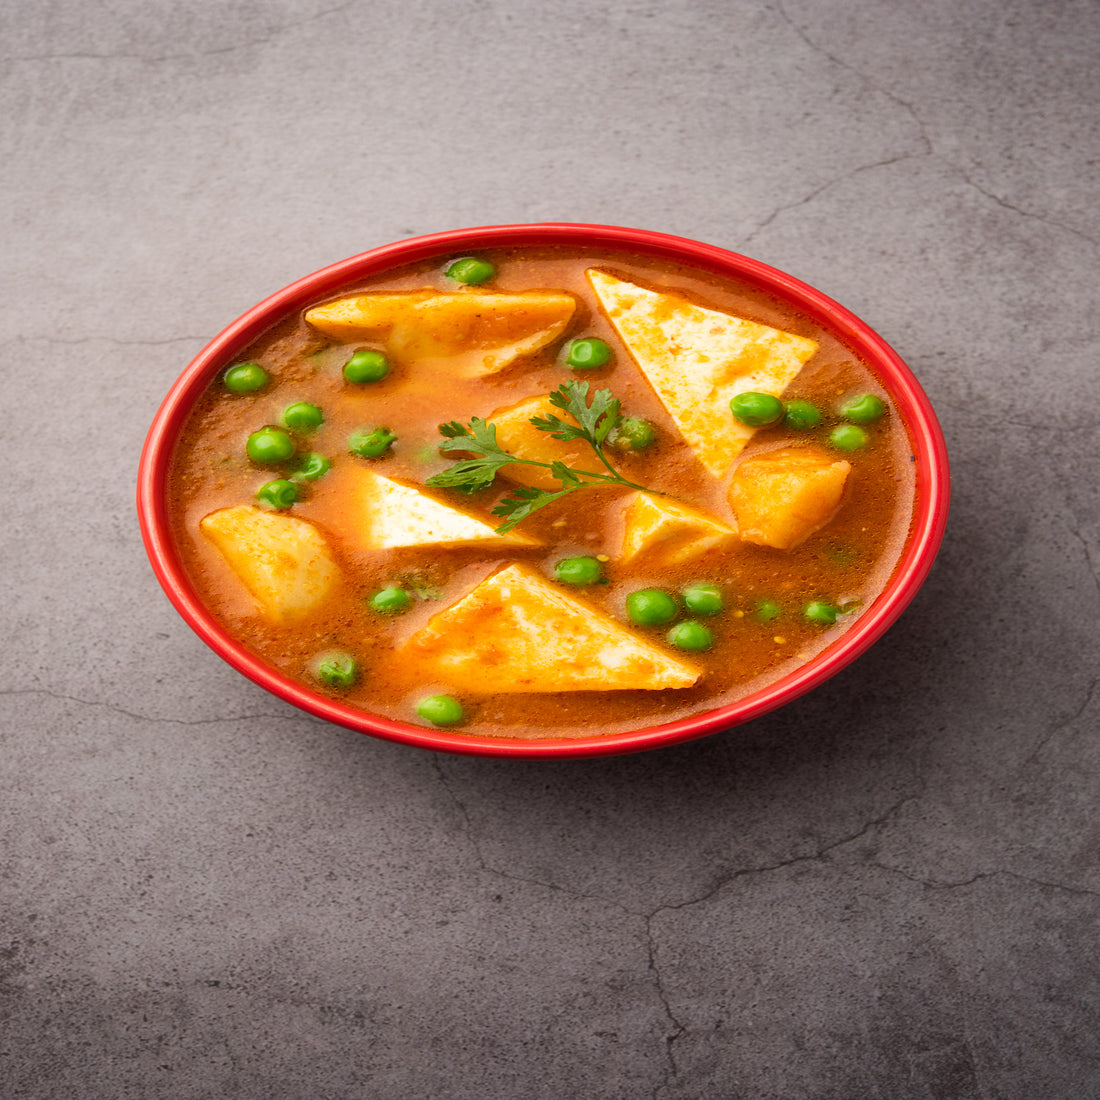 A2 Milk Paneer vs Regular Paneer: Which is Better for You?